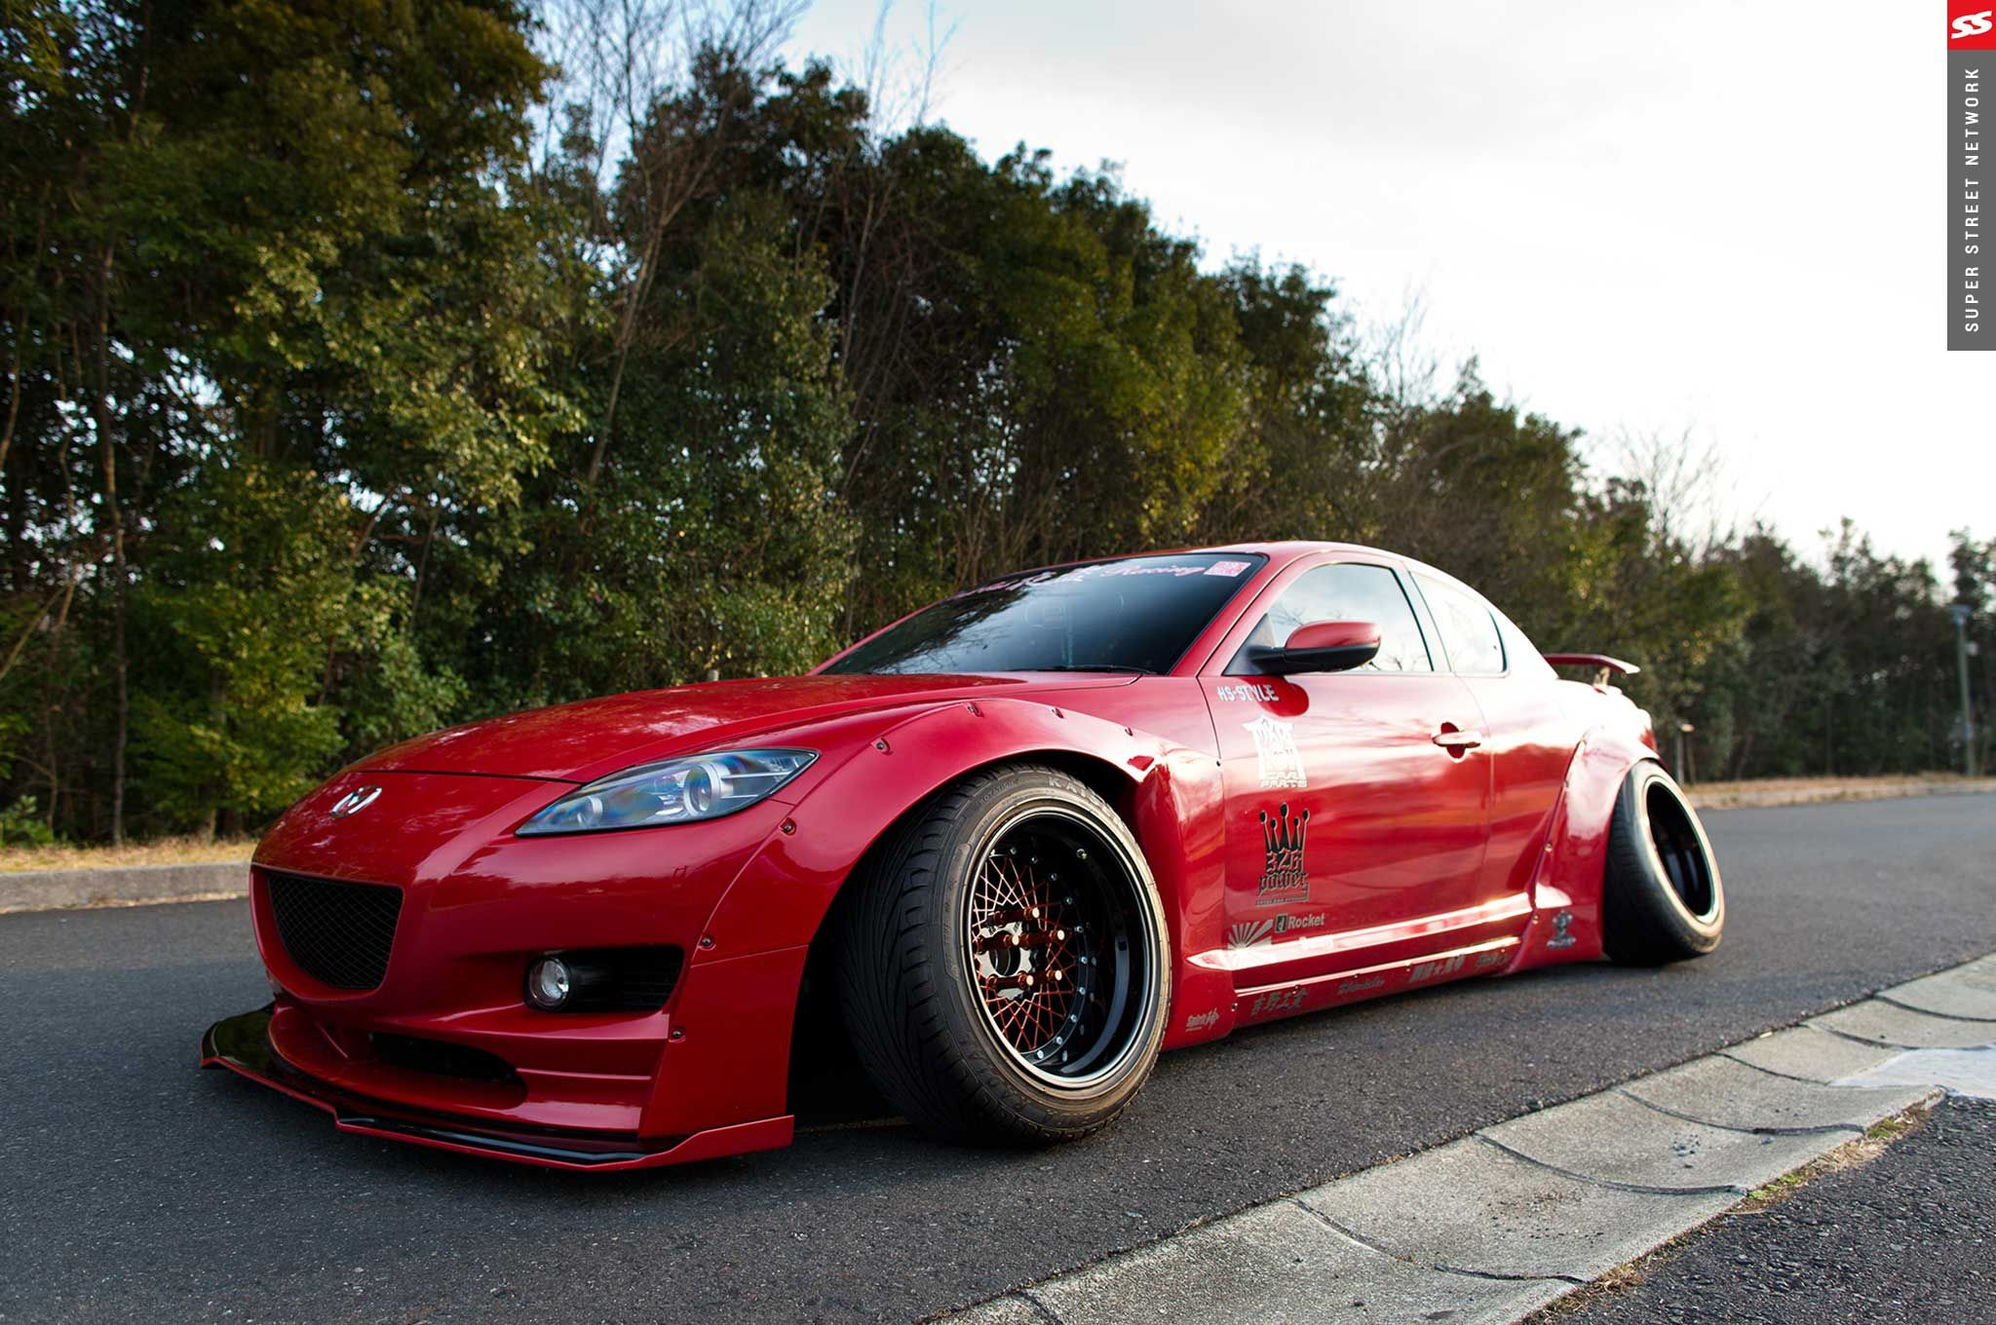 Rx8 wide body kit by Monster Fixed - Page 2 - RX8Club.com